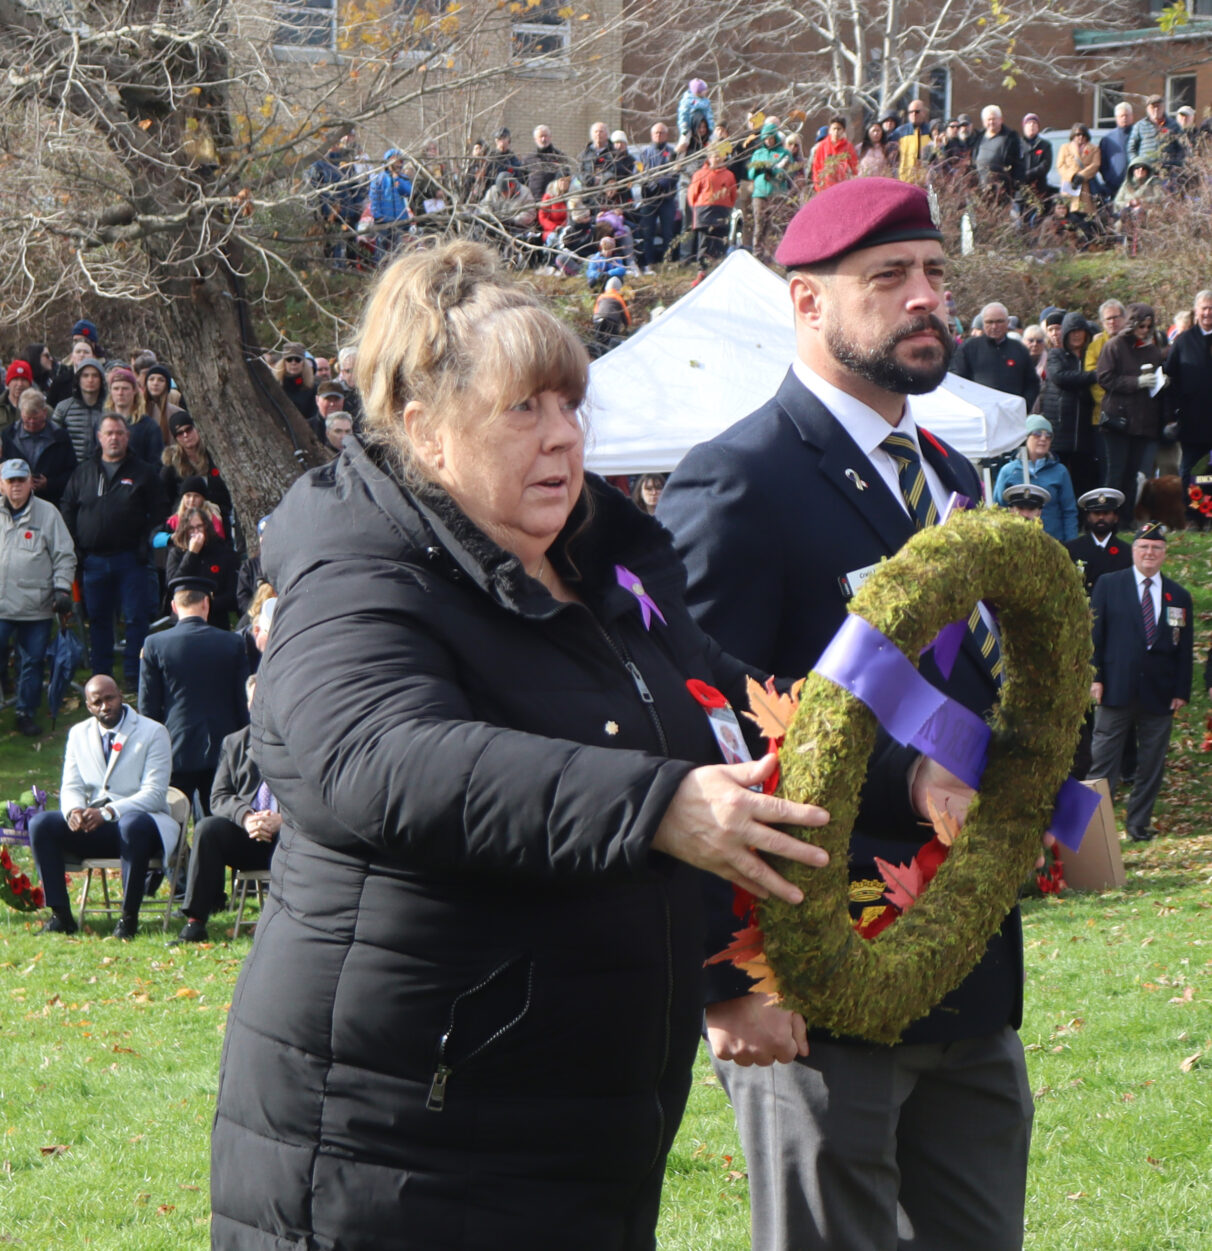 Danita Curwin carries a wreath to place on the wooden hanger in front of the cenotaph.